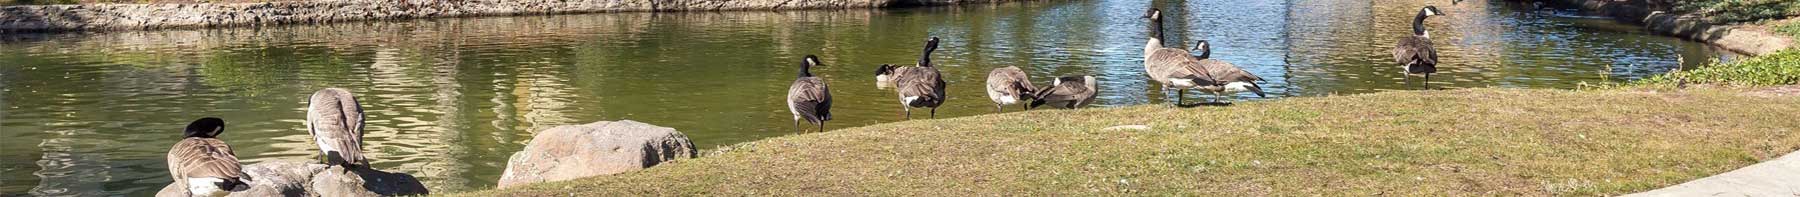 geese at pond